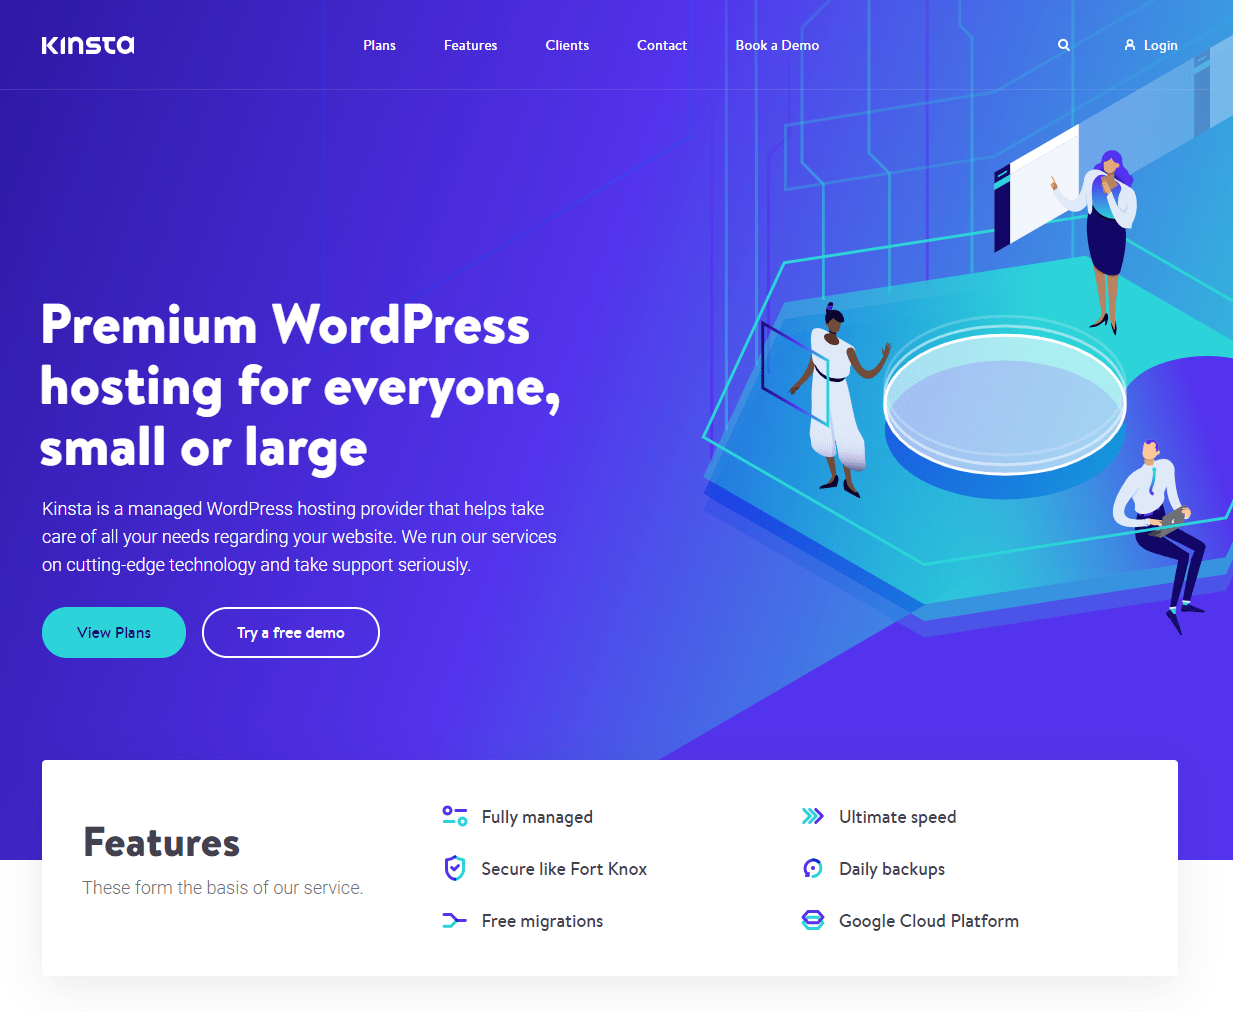 The Kinsta home page